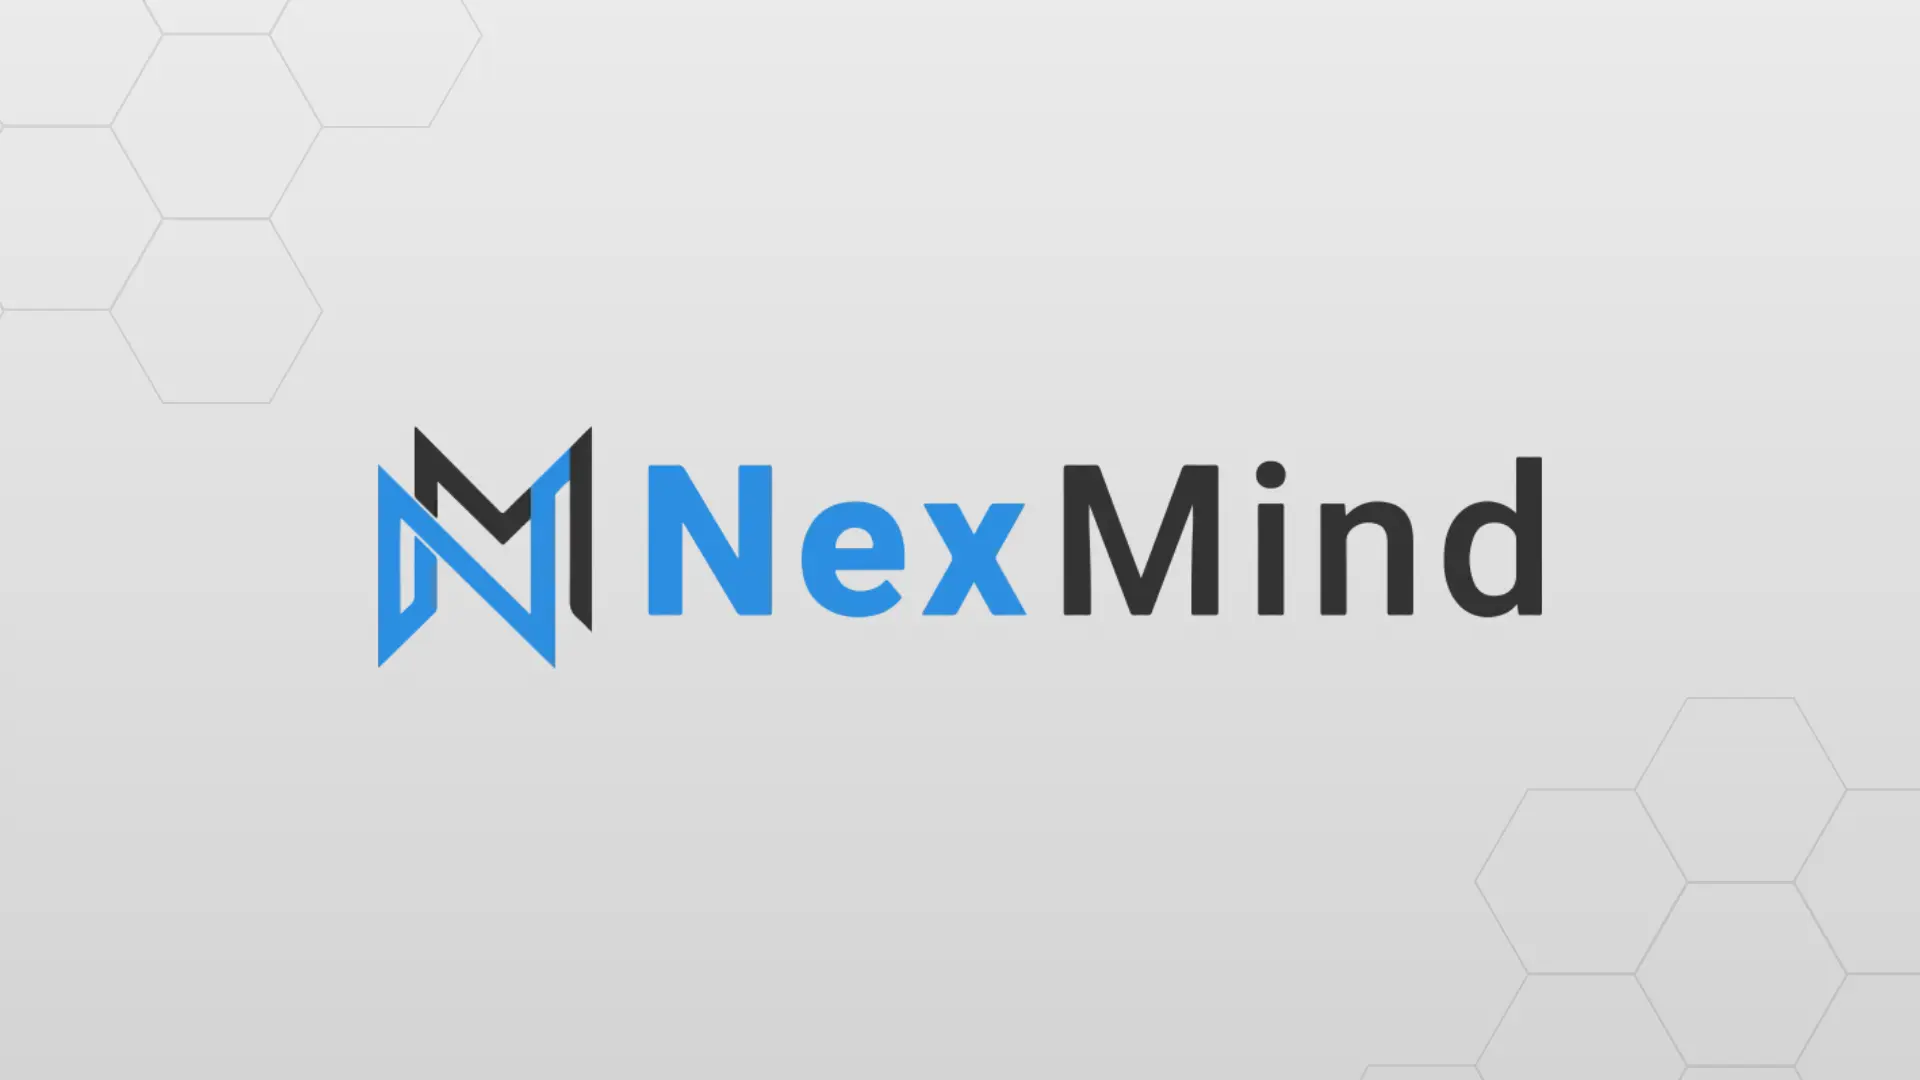 NexMind secures new seed funding to empower digital marketing services, launches Text2Social